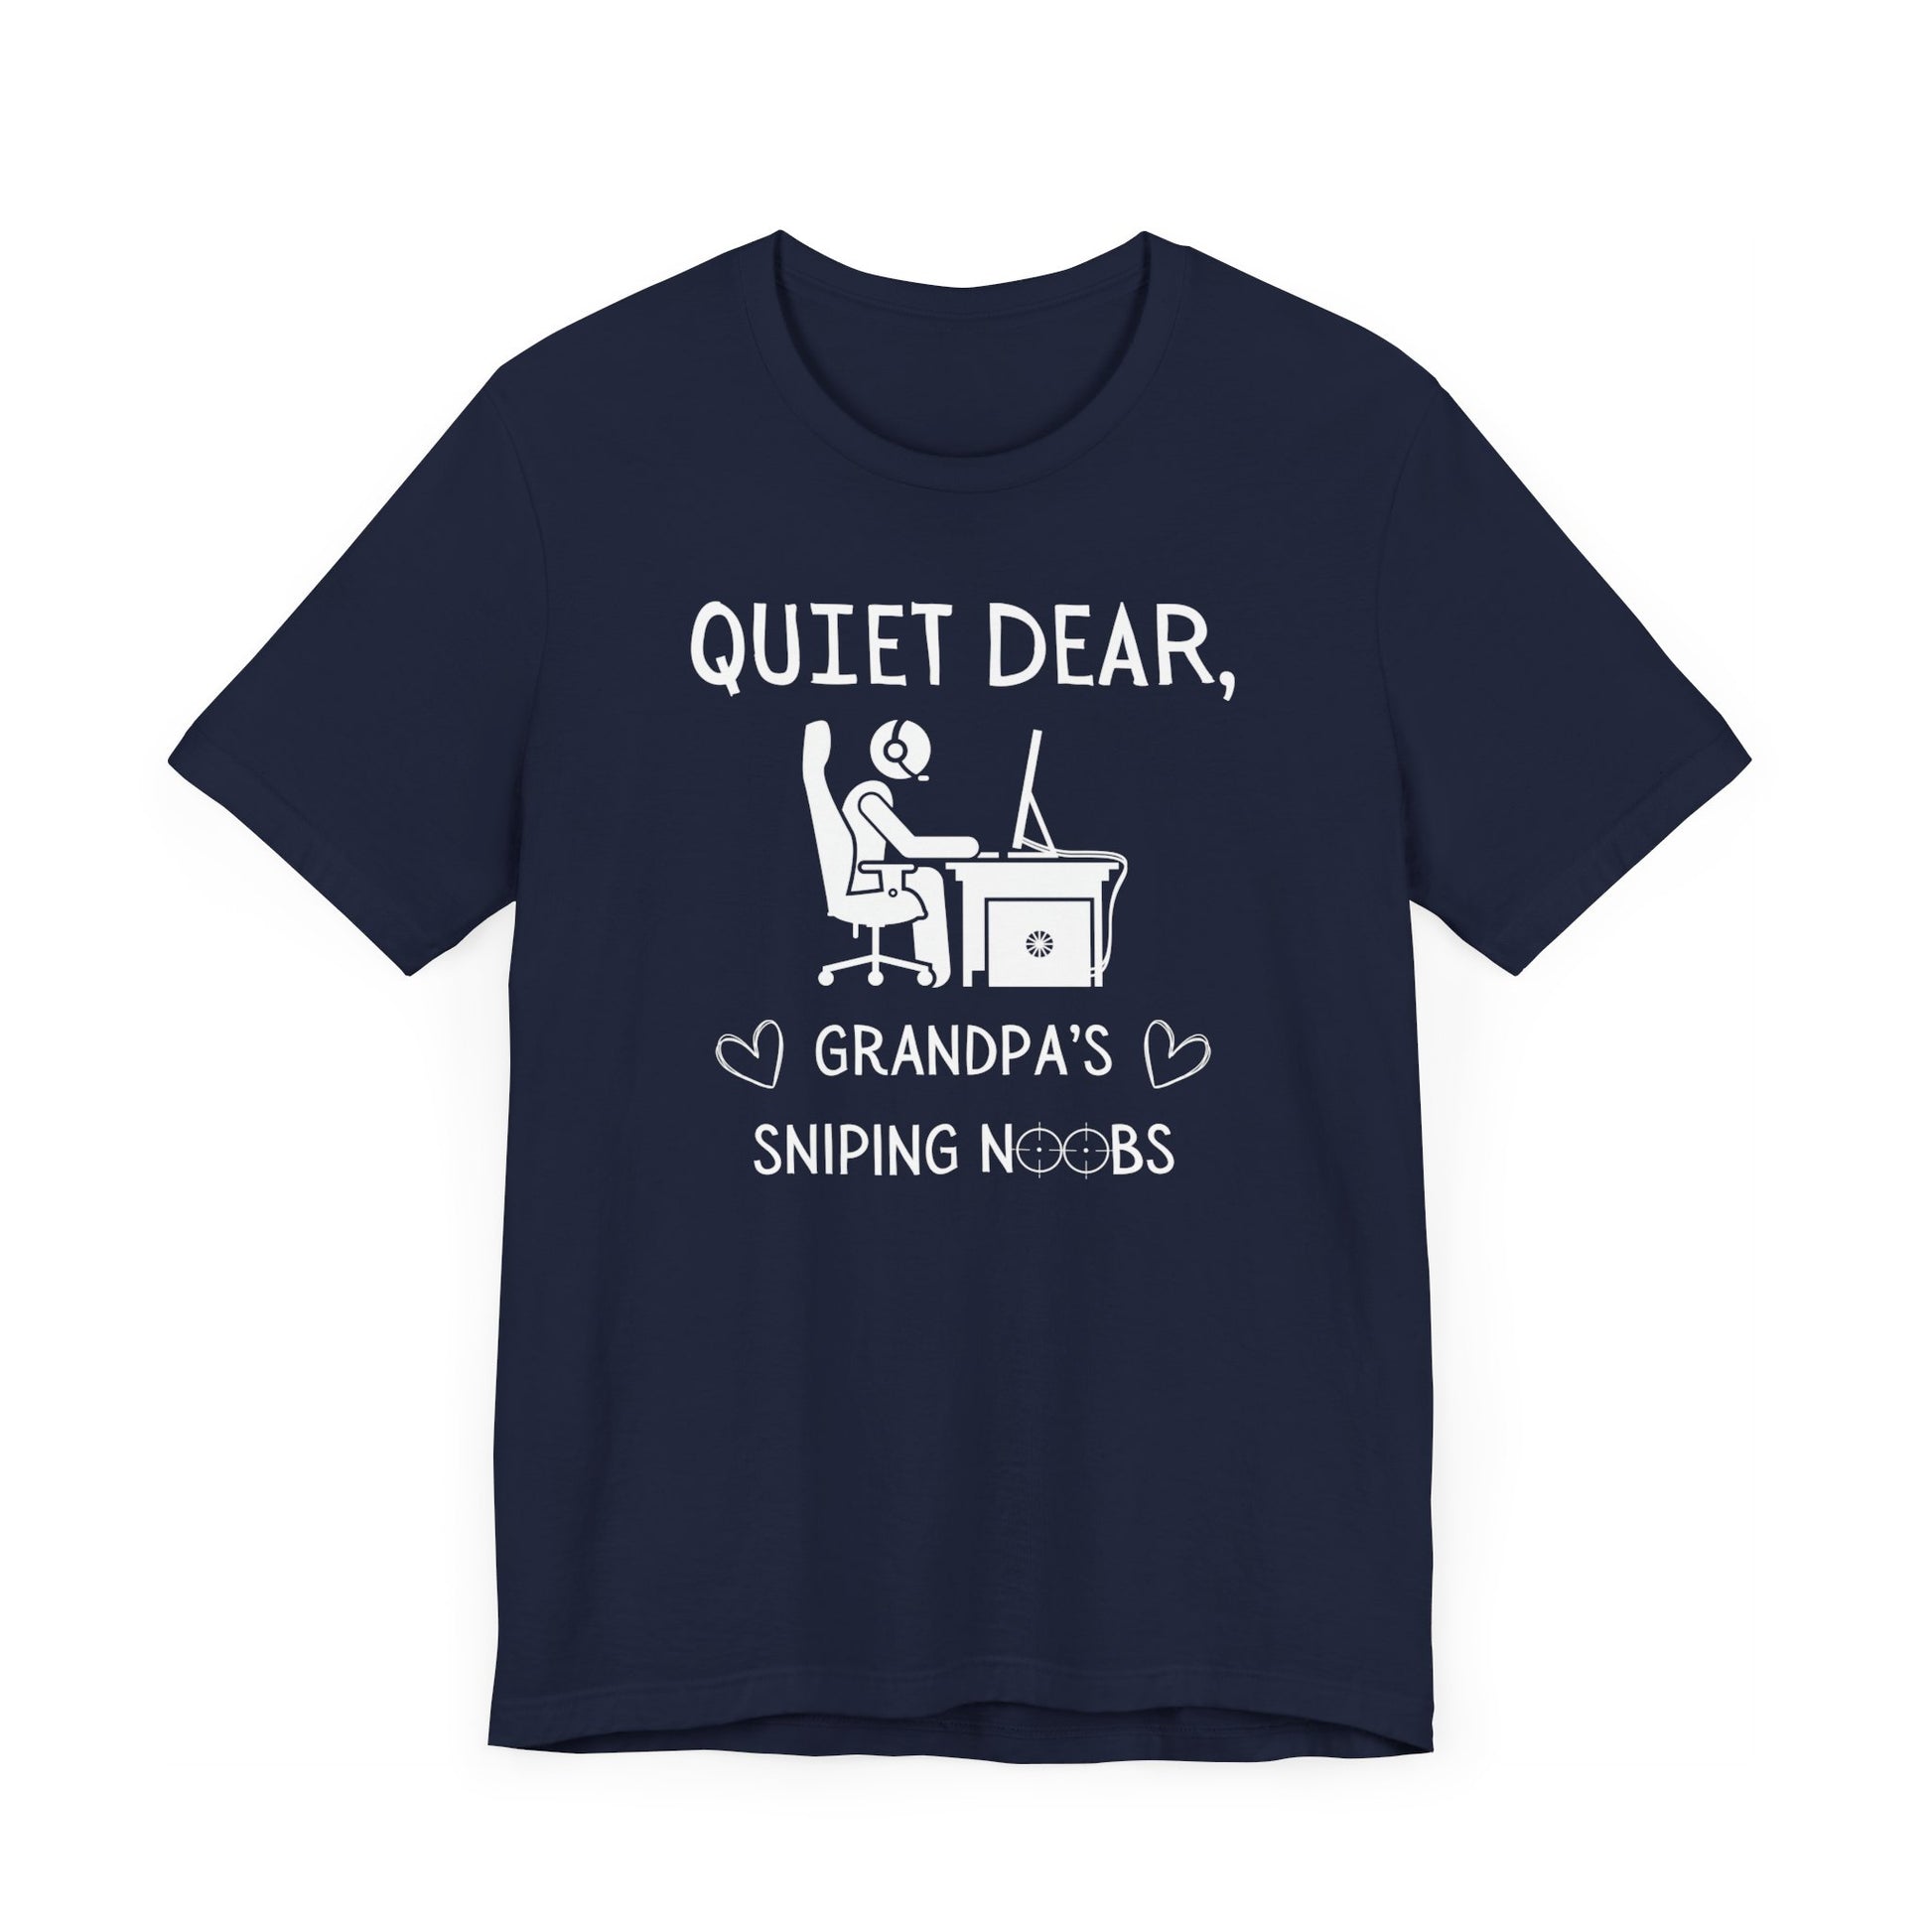 A flat image of a navy t-shirt that reads Quiet Dear, Grandpa's Sniping Noobs in white text. The lower text is framed by two hearts, and the O's are in the shape of sniper scopes. In the center of the shirt is an image of a person at a desk with a gaming PC.